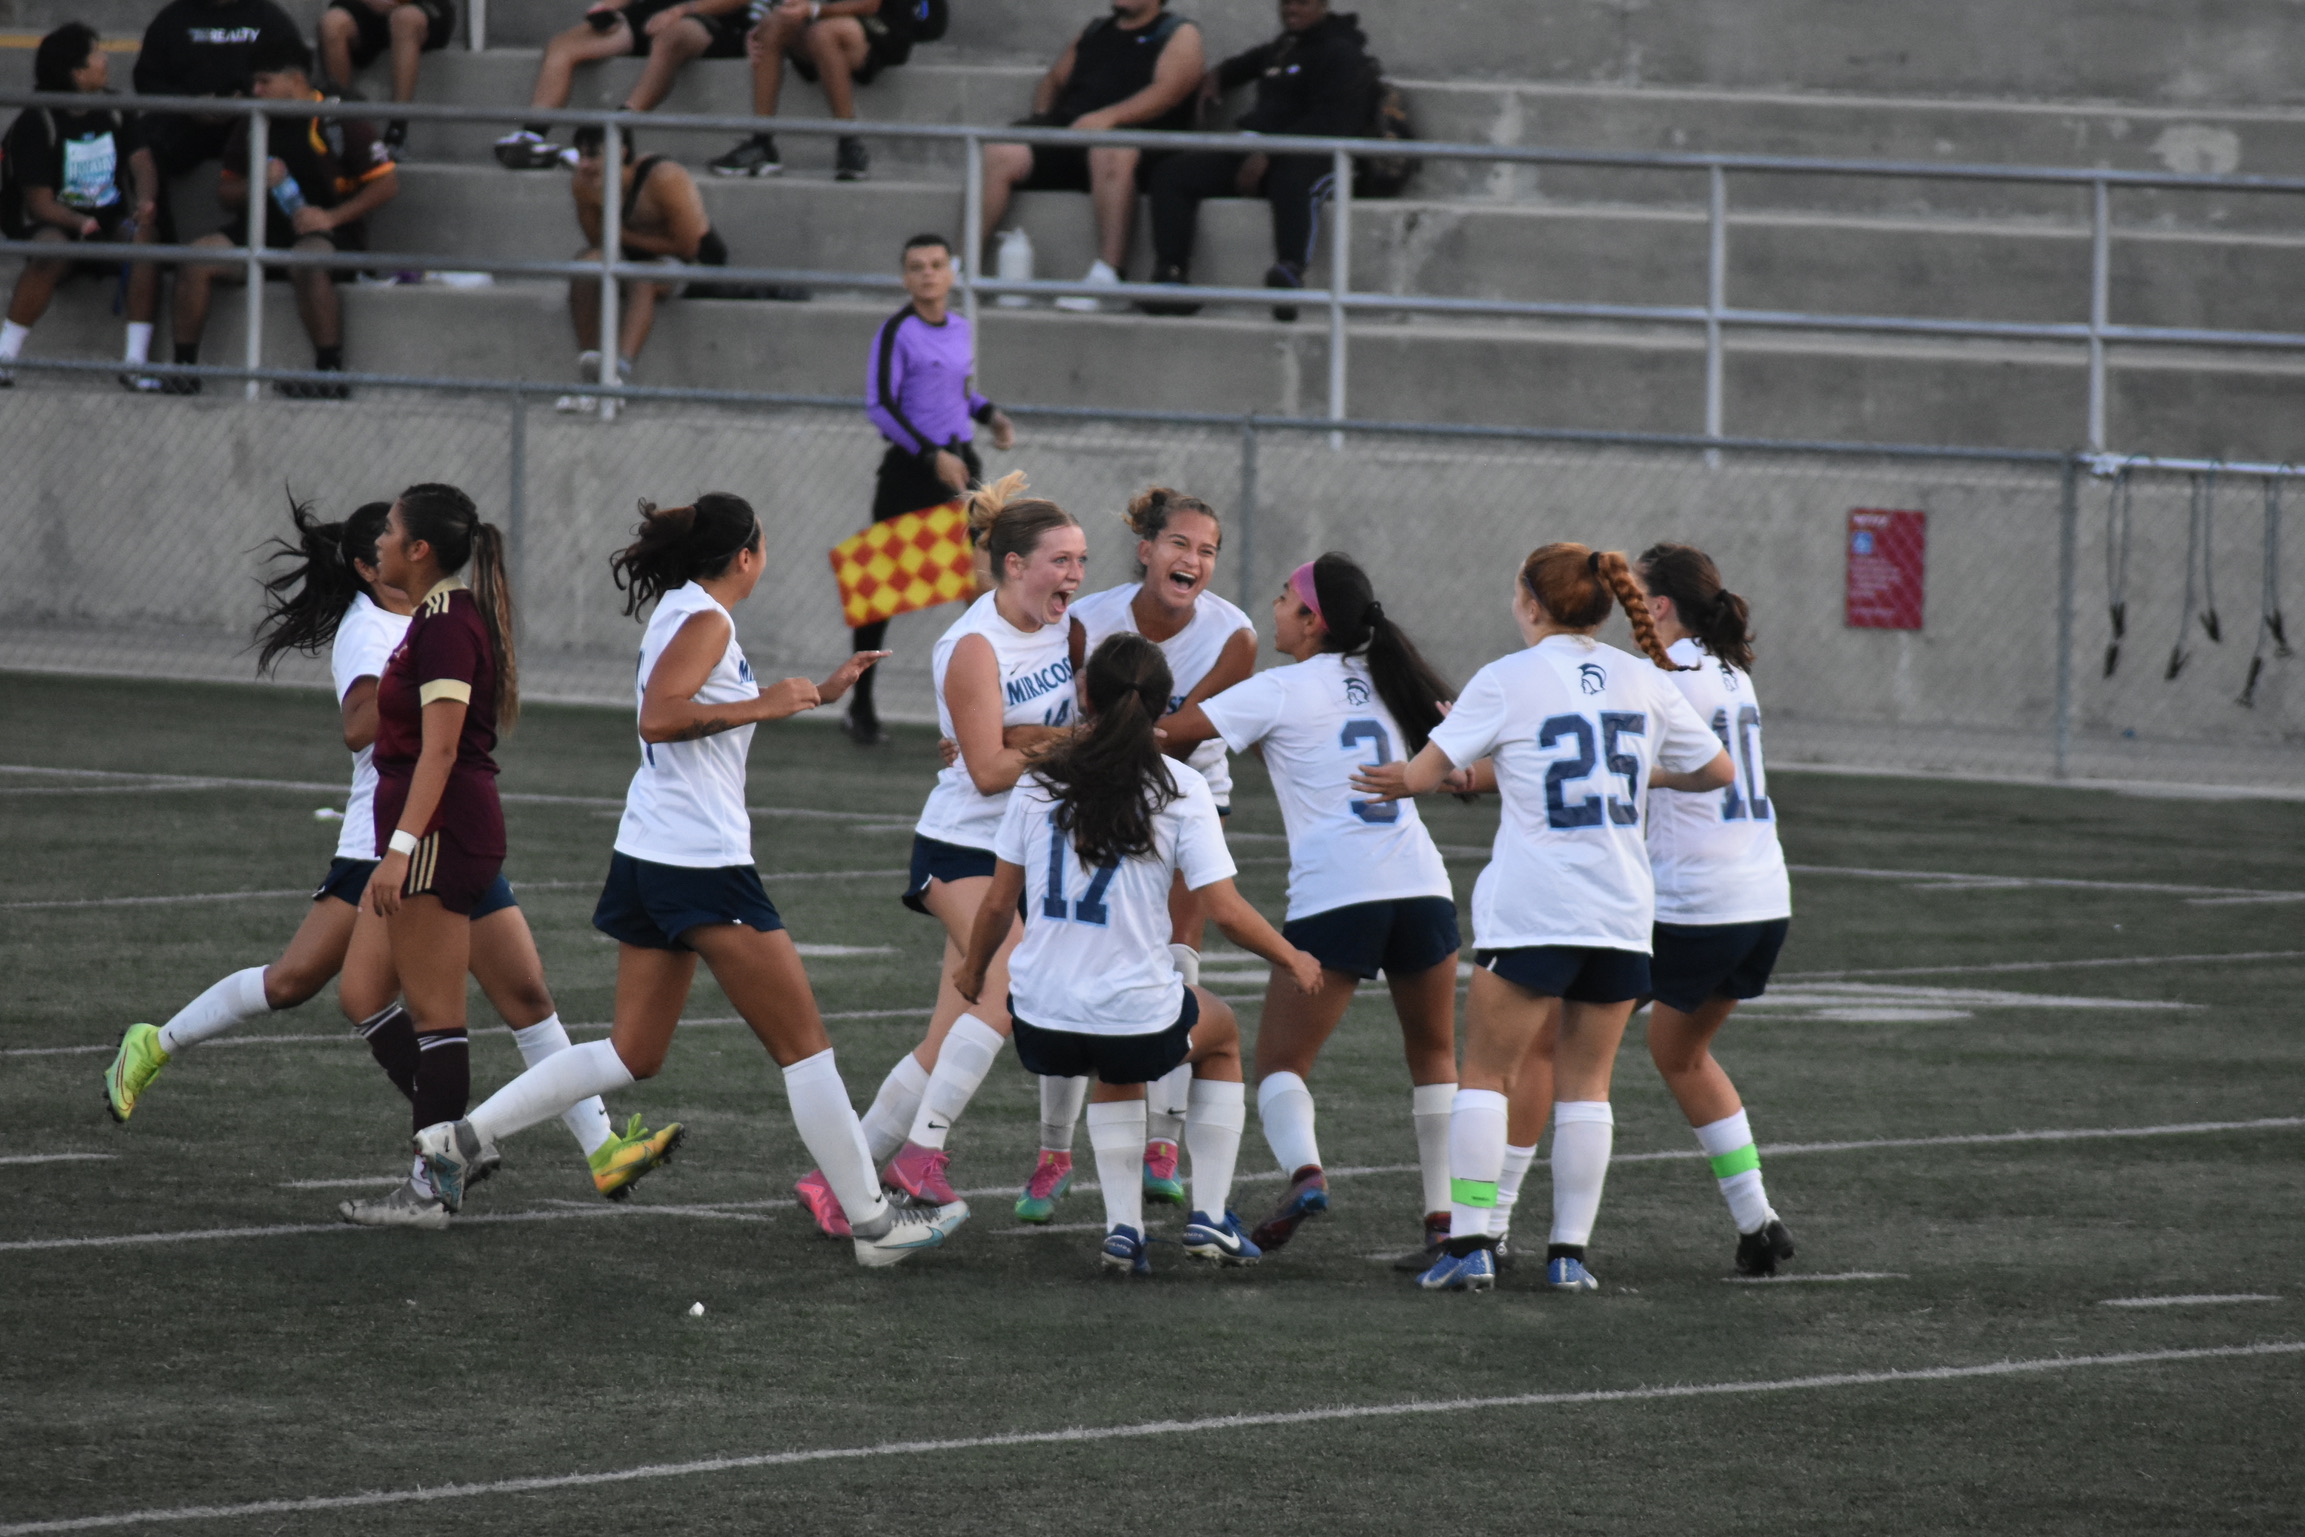 MIRACOSTA CONTINUES TO ROLL, STAYS UNDEFEATED IN CONFERENCE